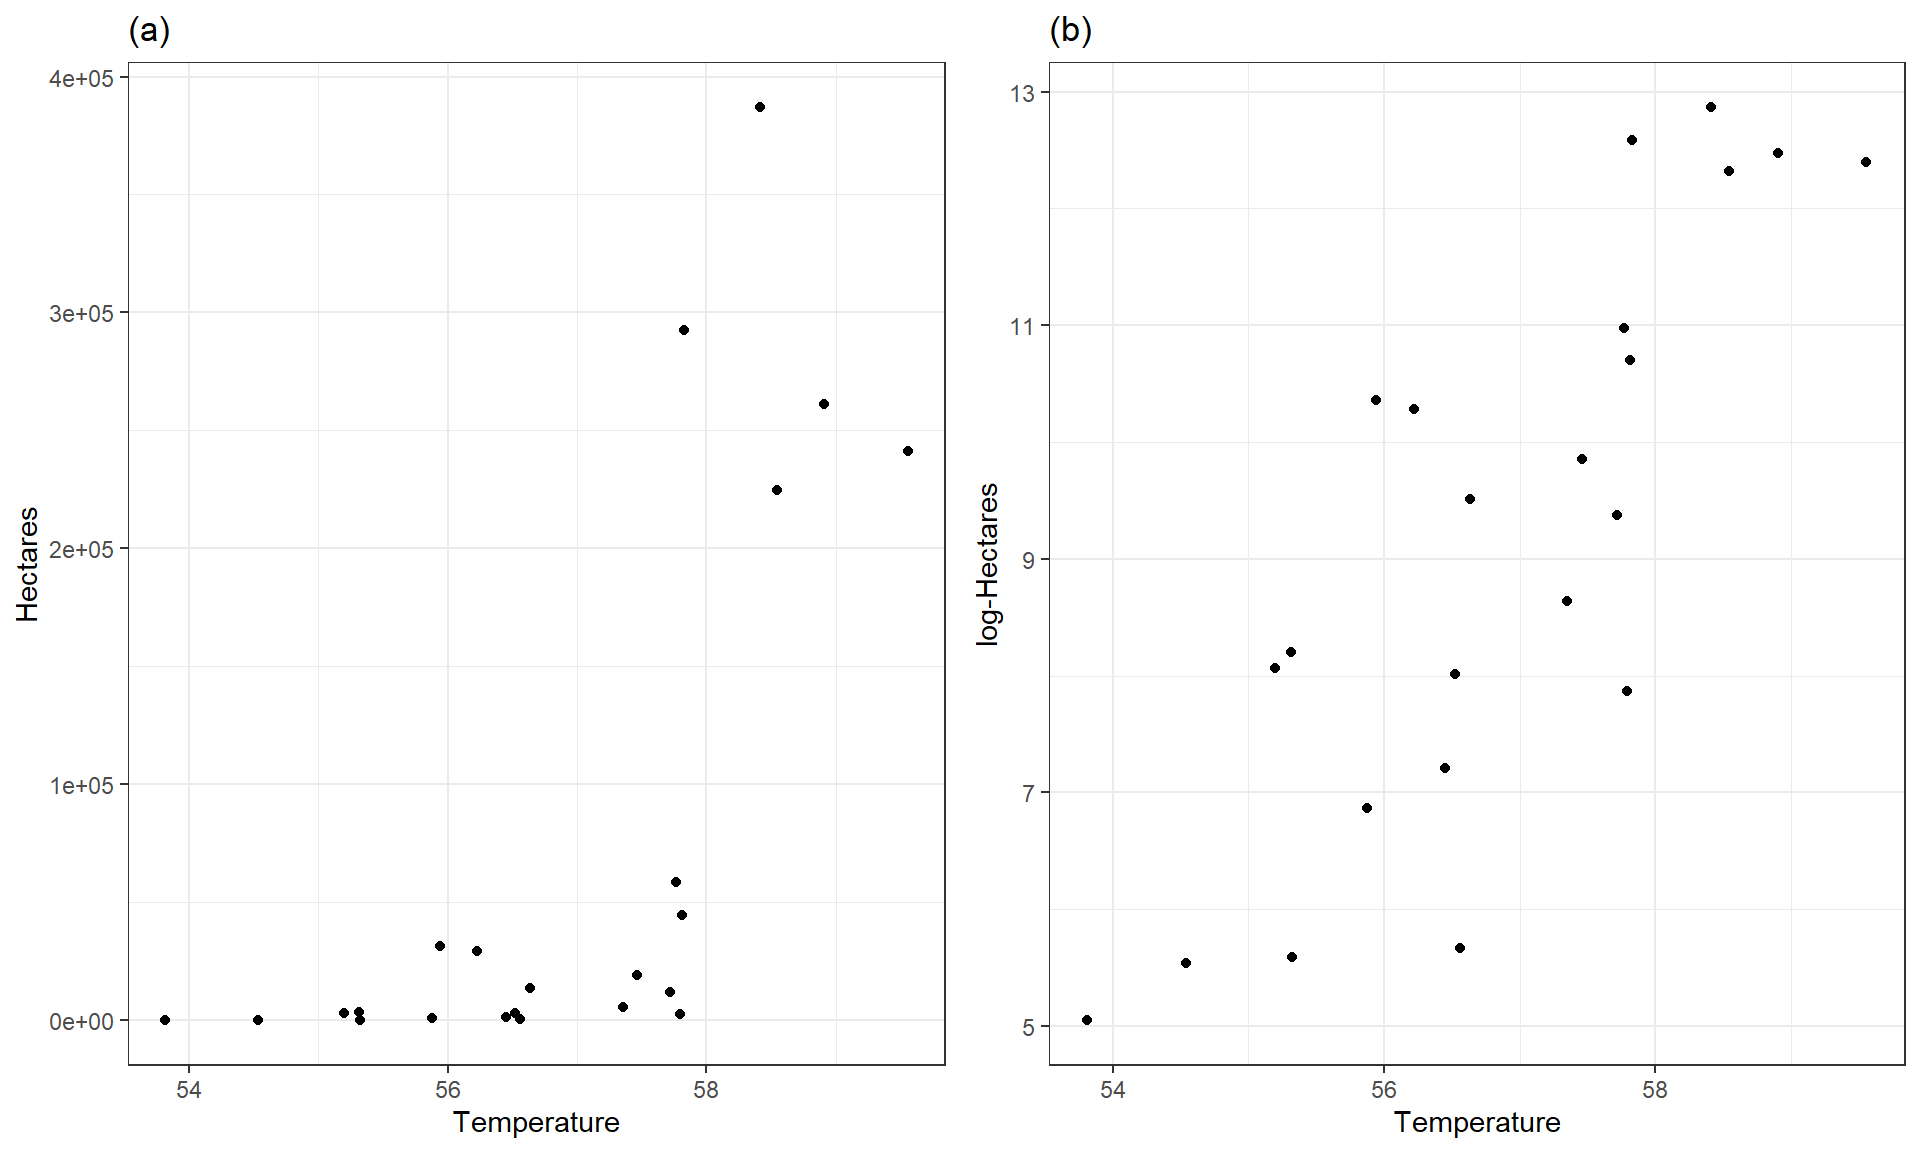 Scatterplots of Hectares (a) and log-Hectares (b) vs Temperature.